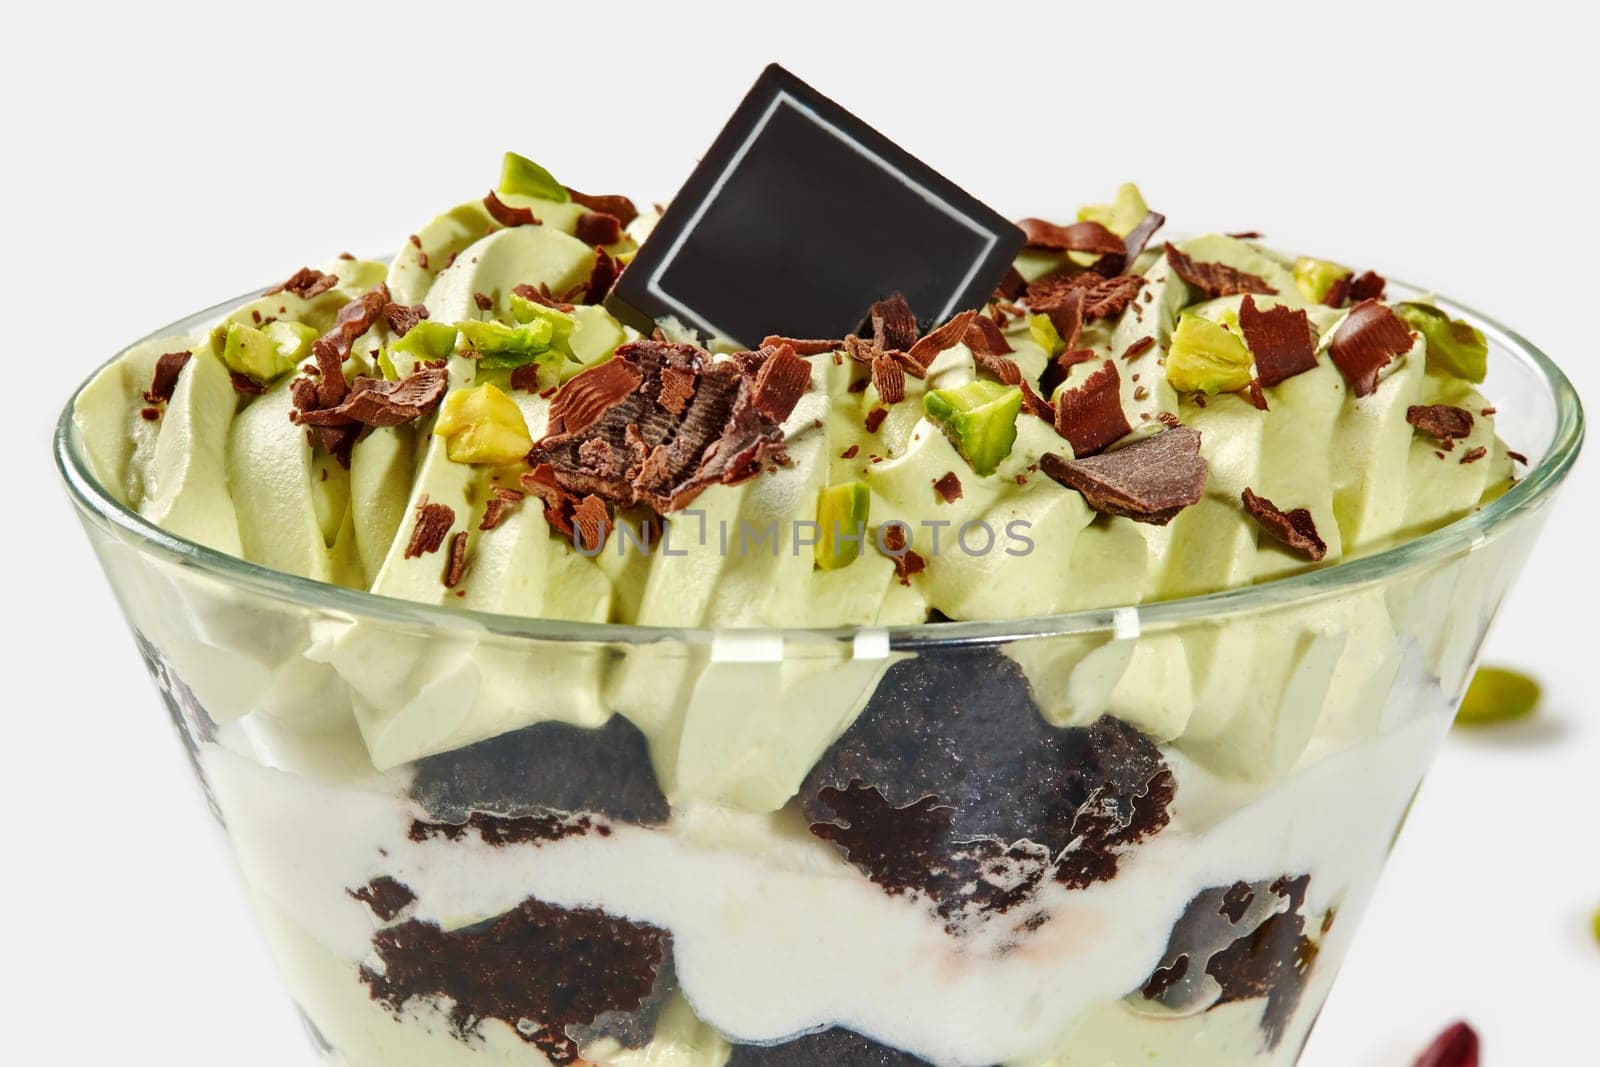 Pistachio and chocolate layered trifle with brownie, ice cream and whipped cream by nazarovsergey